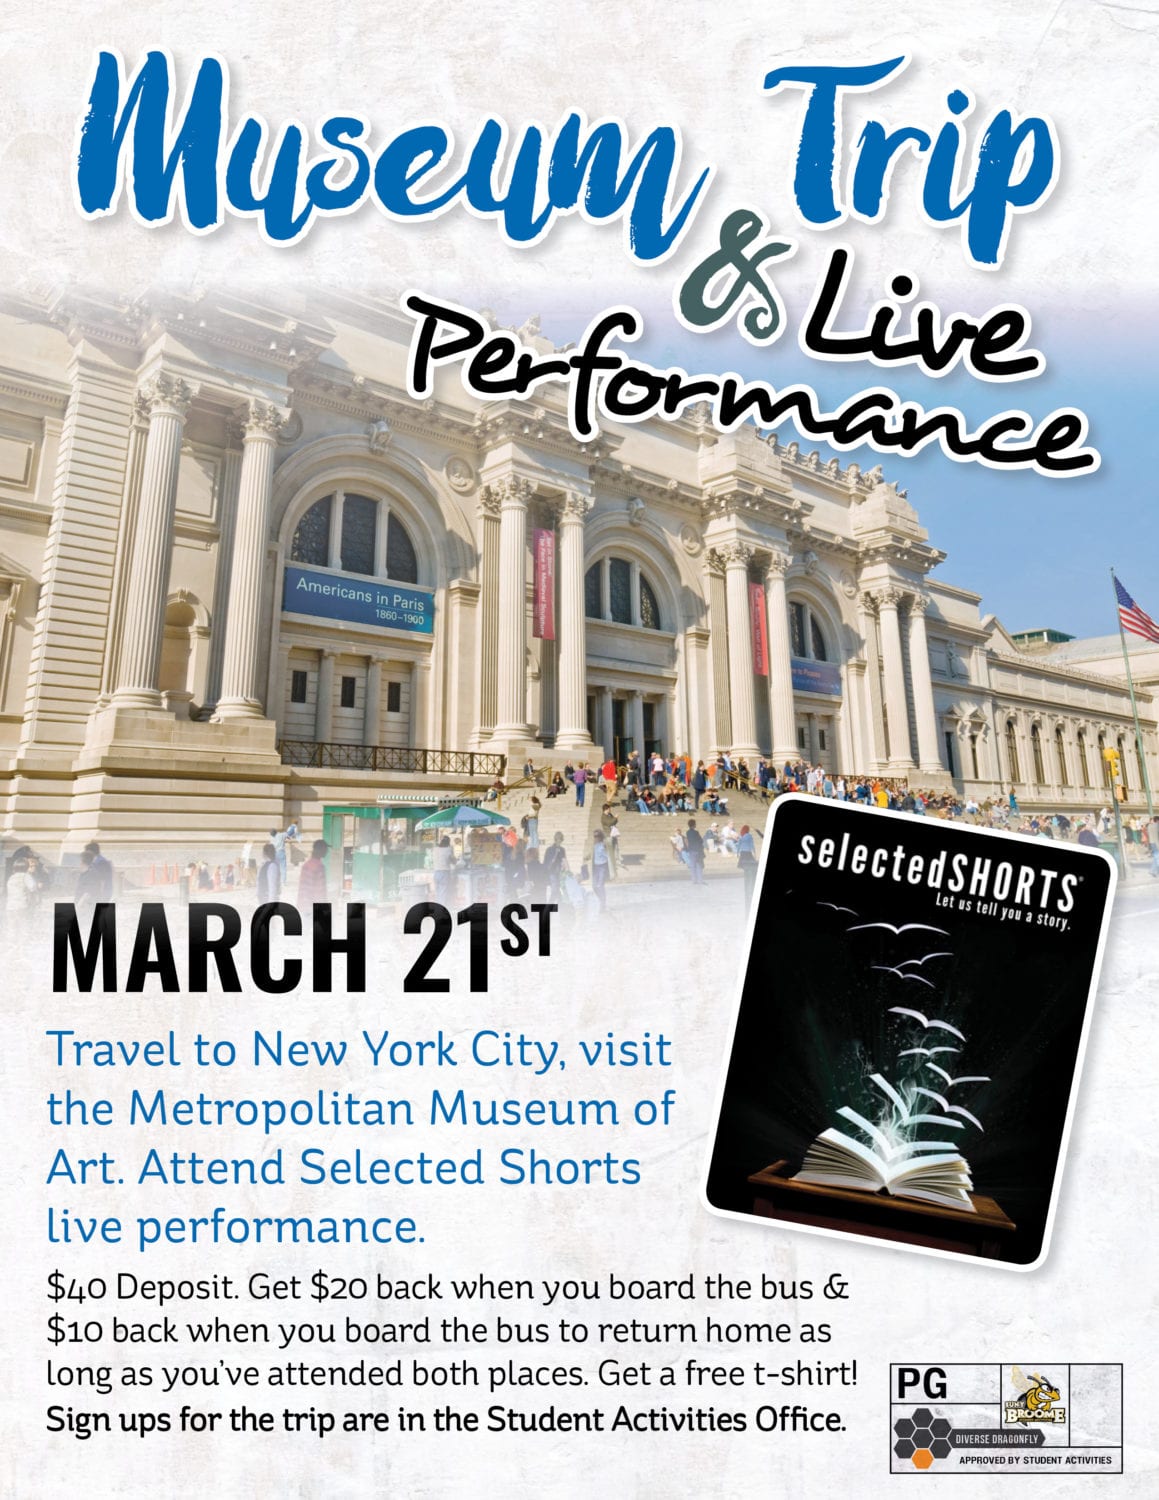 NYC Museum Trip & Live Performance on March 21